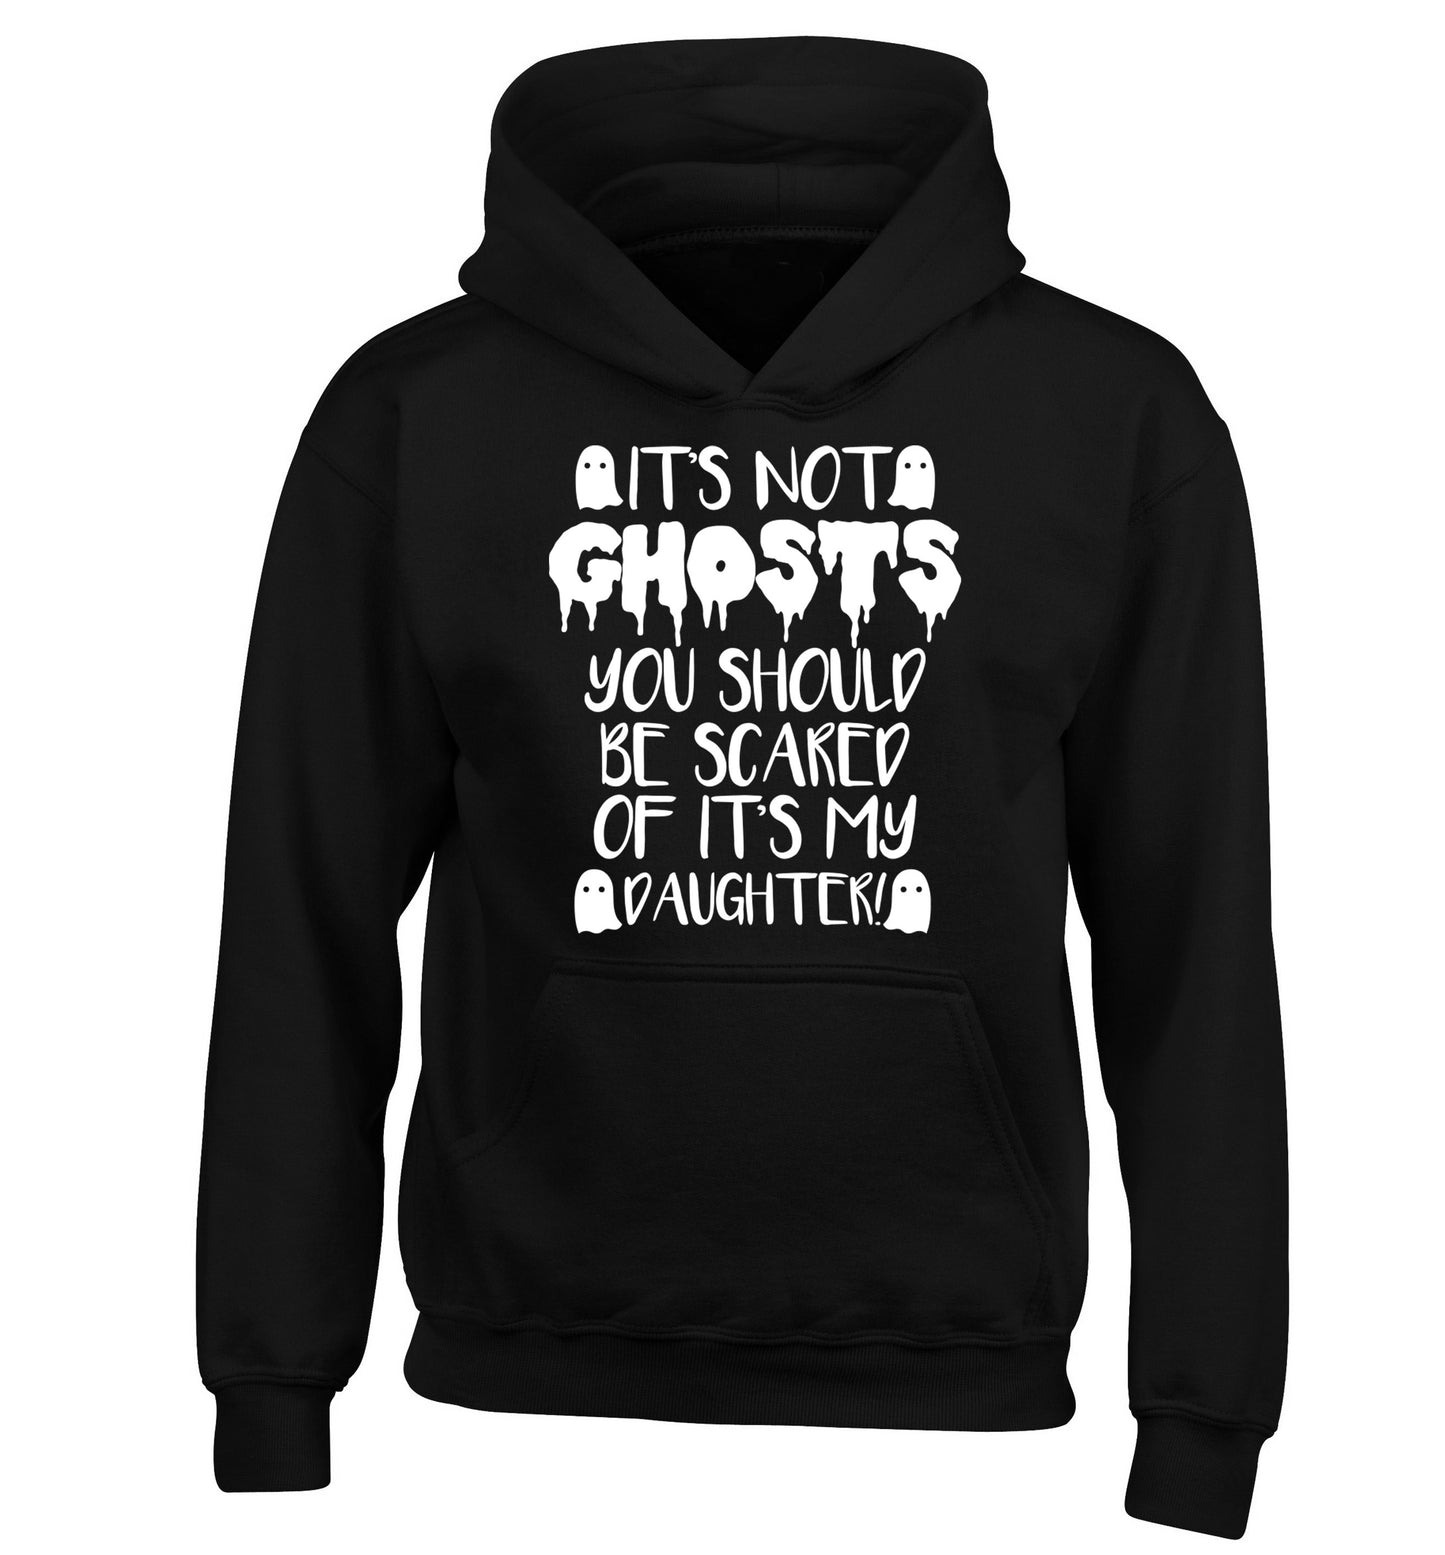 It's not ghosts you should be scared of it's my daughter! children's black hoodie 12-14 Years